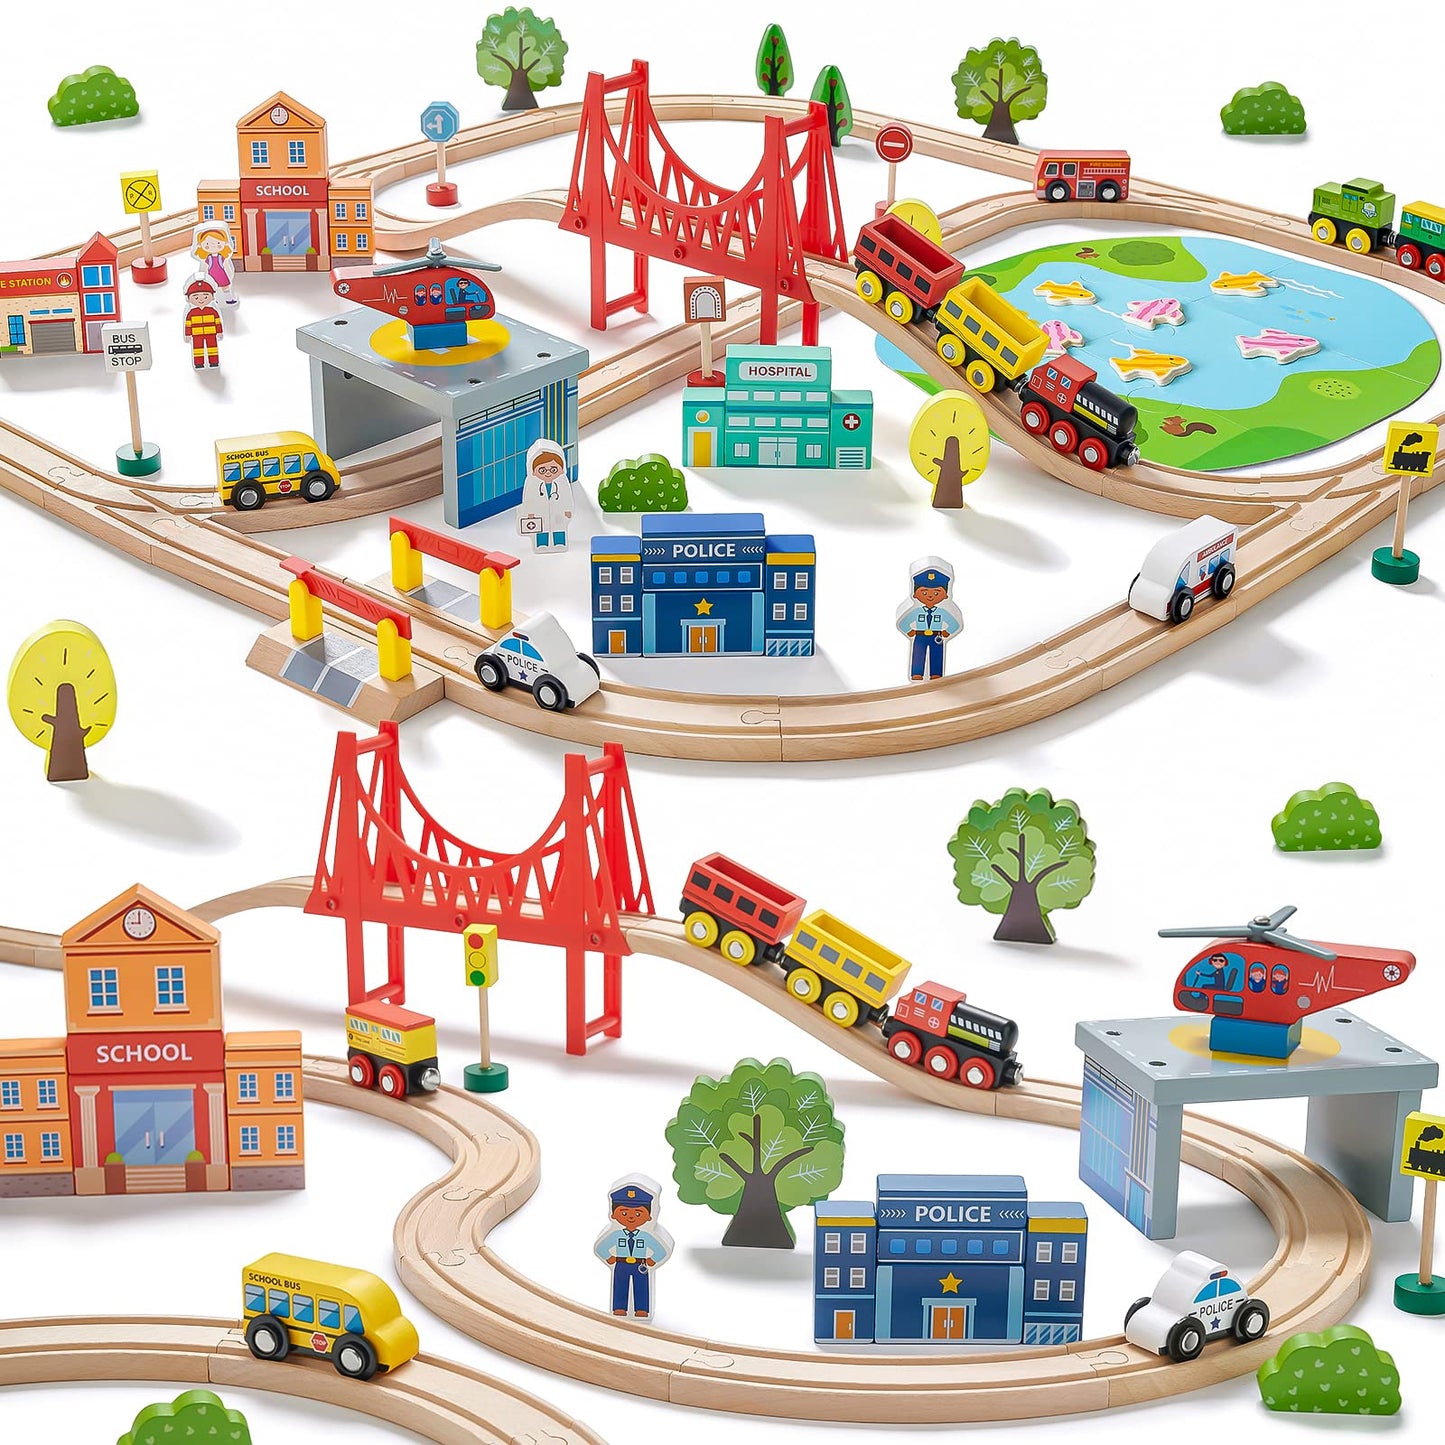 Tiny Land Train Set 110pcs Wooden Train Set, Toy Train for Boys & Girls with Wooden Train Track, Wooden Toys for 3-7 Years Old Toddlers & Kids,